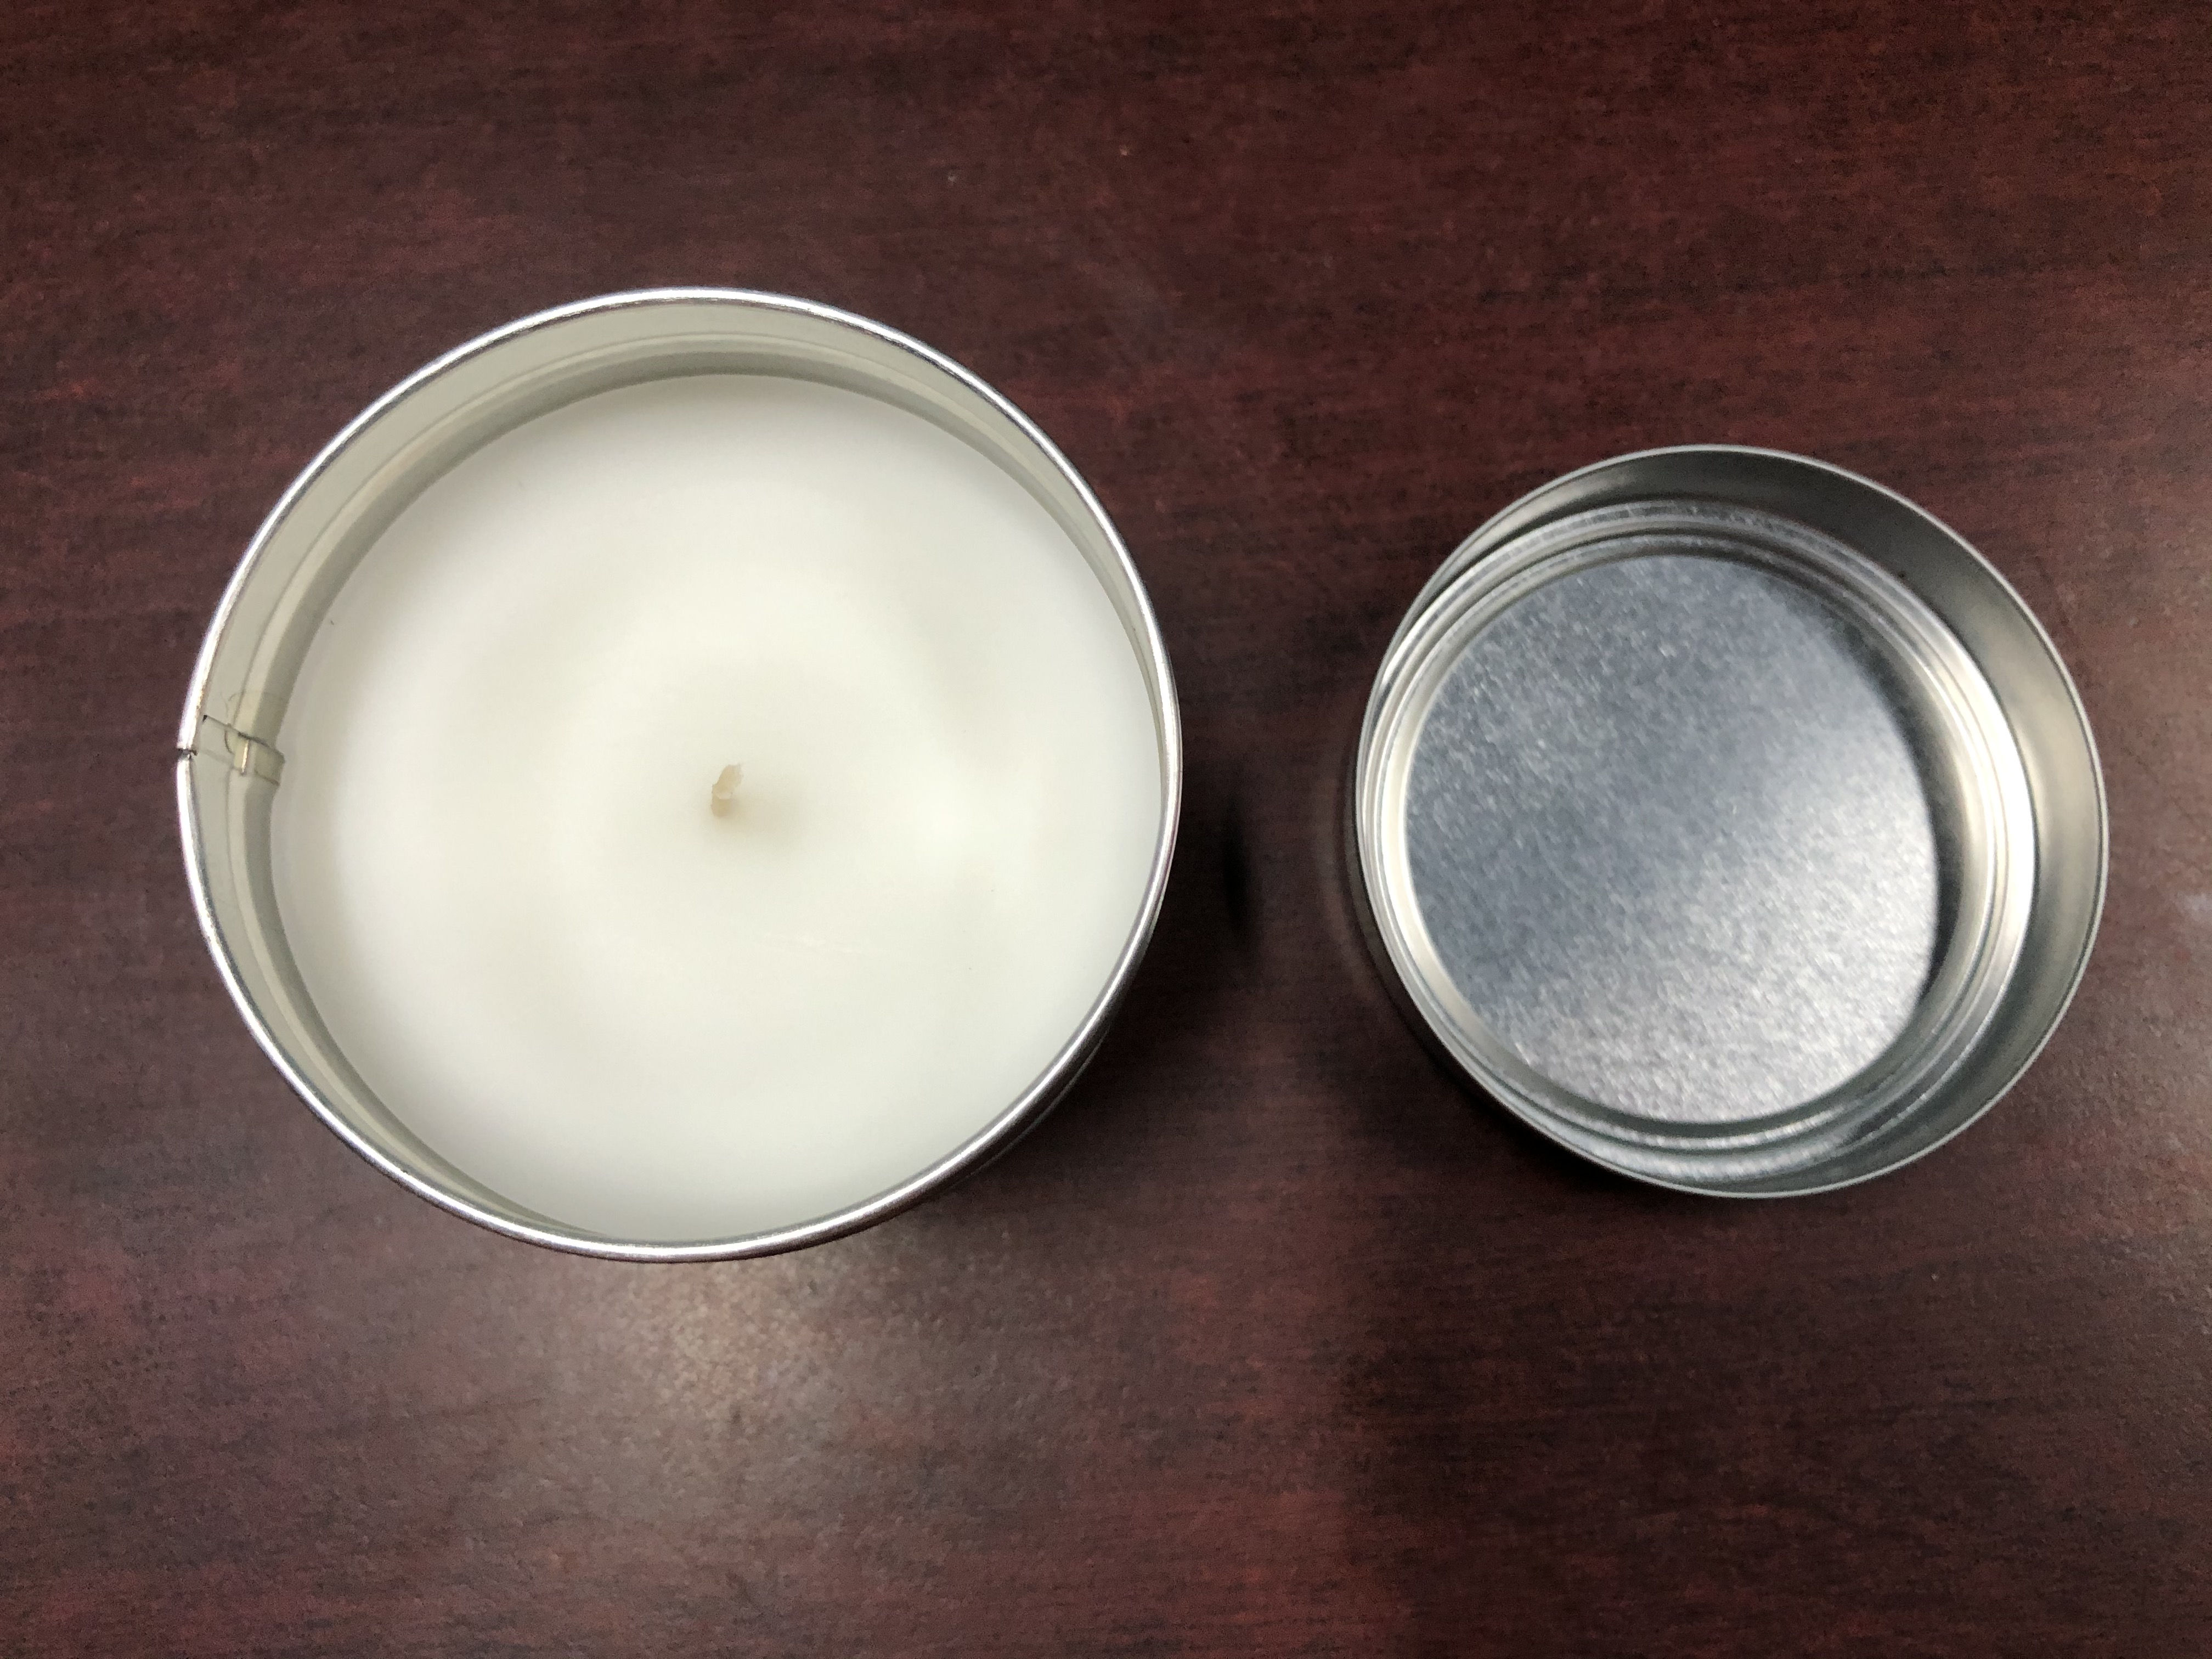 Definition of A Candle Third Party Inspection Service Inspection Standards And Methods for Candlesticks 